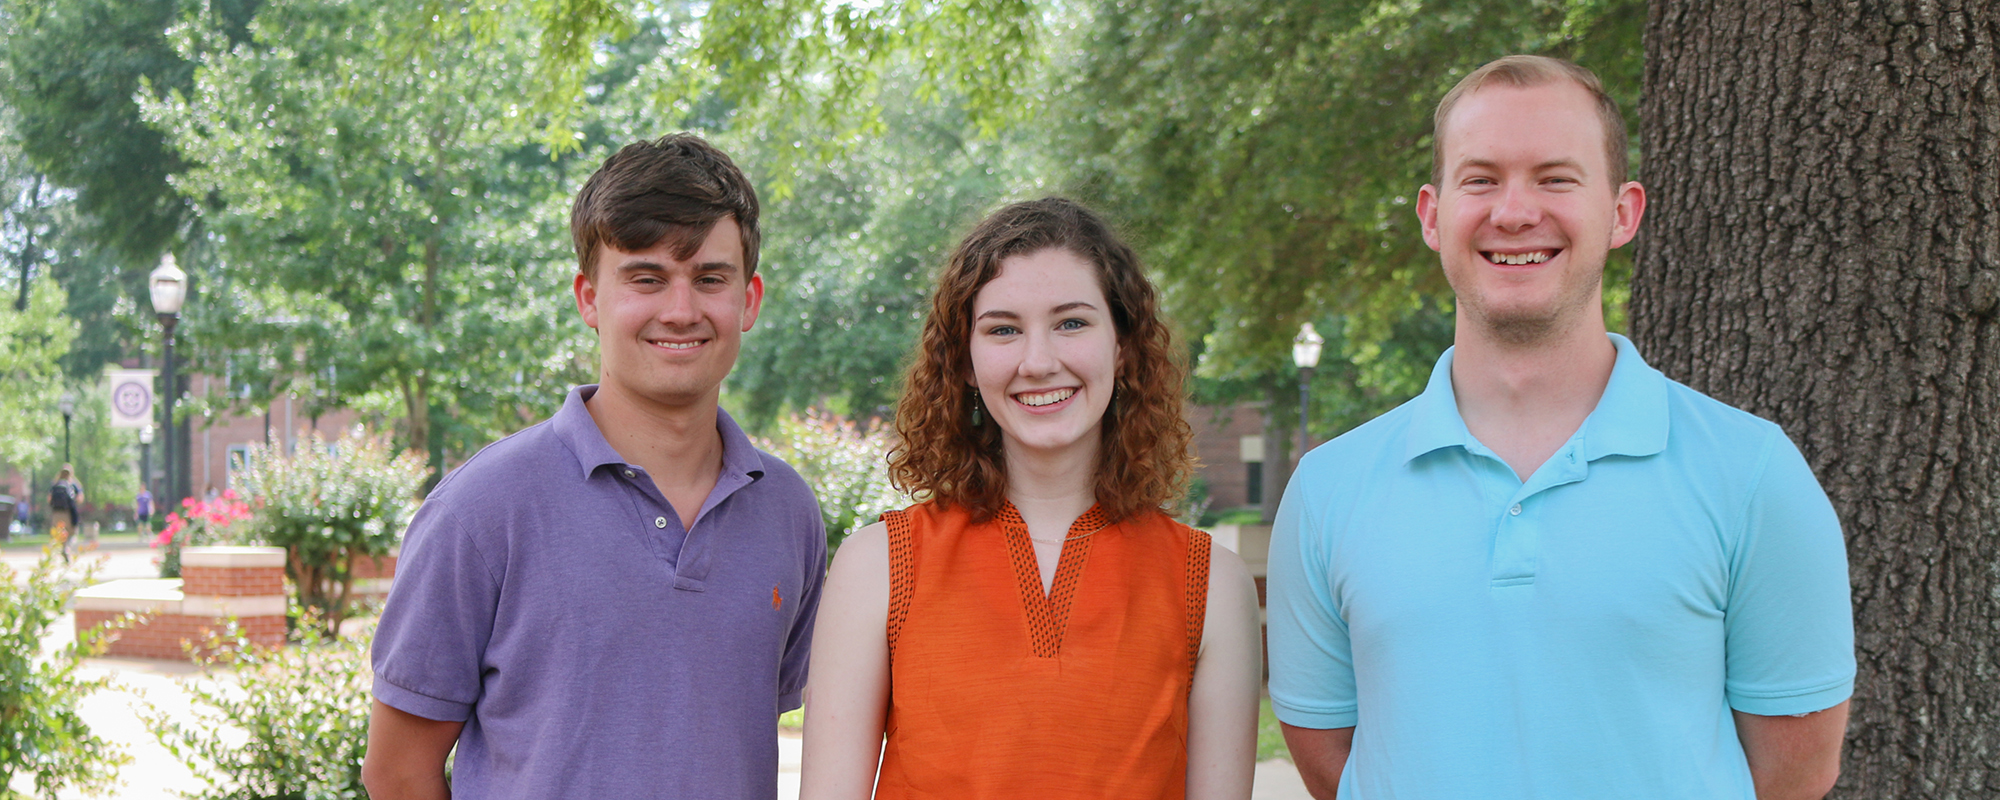 Griffin Peeples, at left, was named top Academic Achiever at Ouachita’s recent Academic Awards Banquet. Sara “Cat” Williams and Ben Lange-Smith were recognized as Outstanding Senior Woman and Man, respectively.